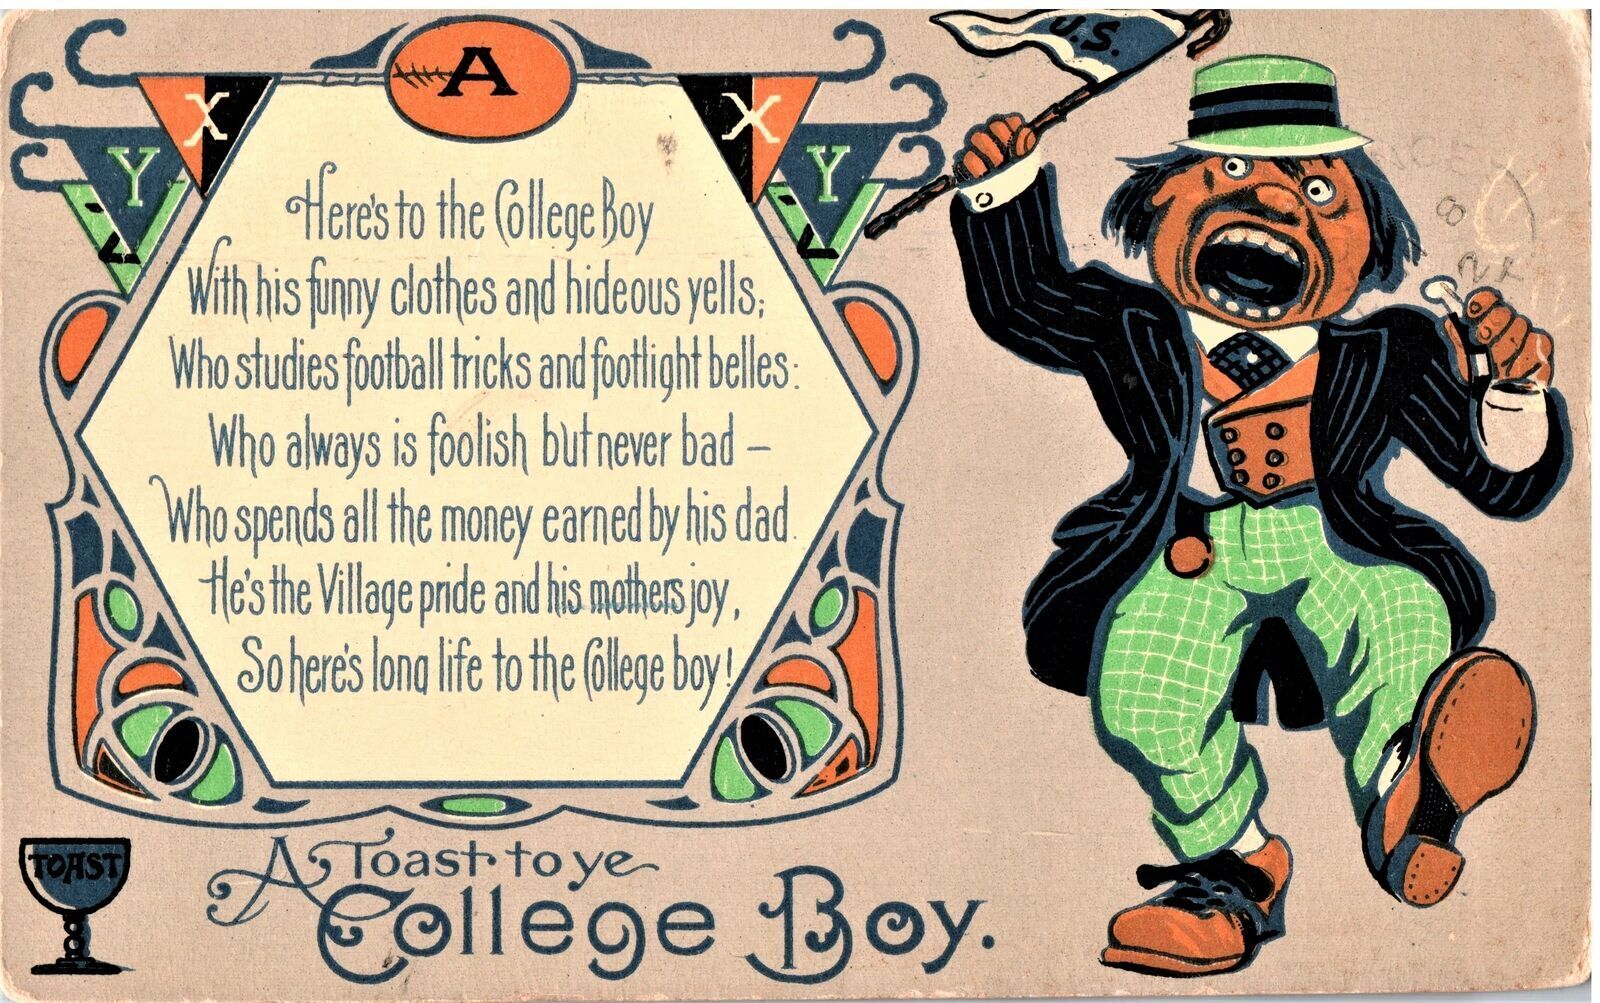 VINTAGE POSTCARD A TOAST TO THE COLLEGE BOY HUMOR MAILED IN 1912